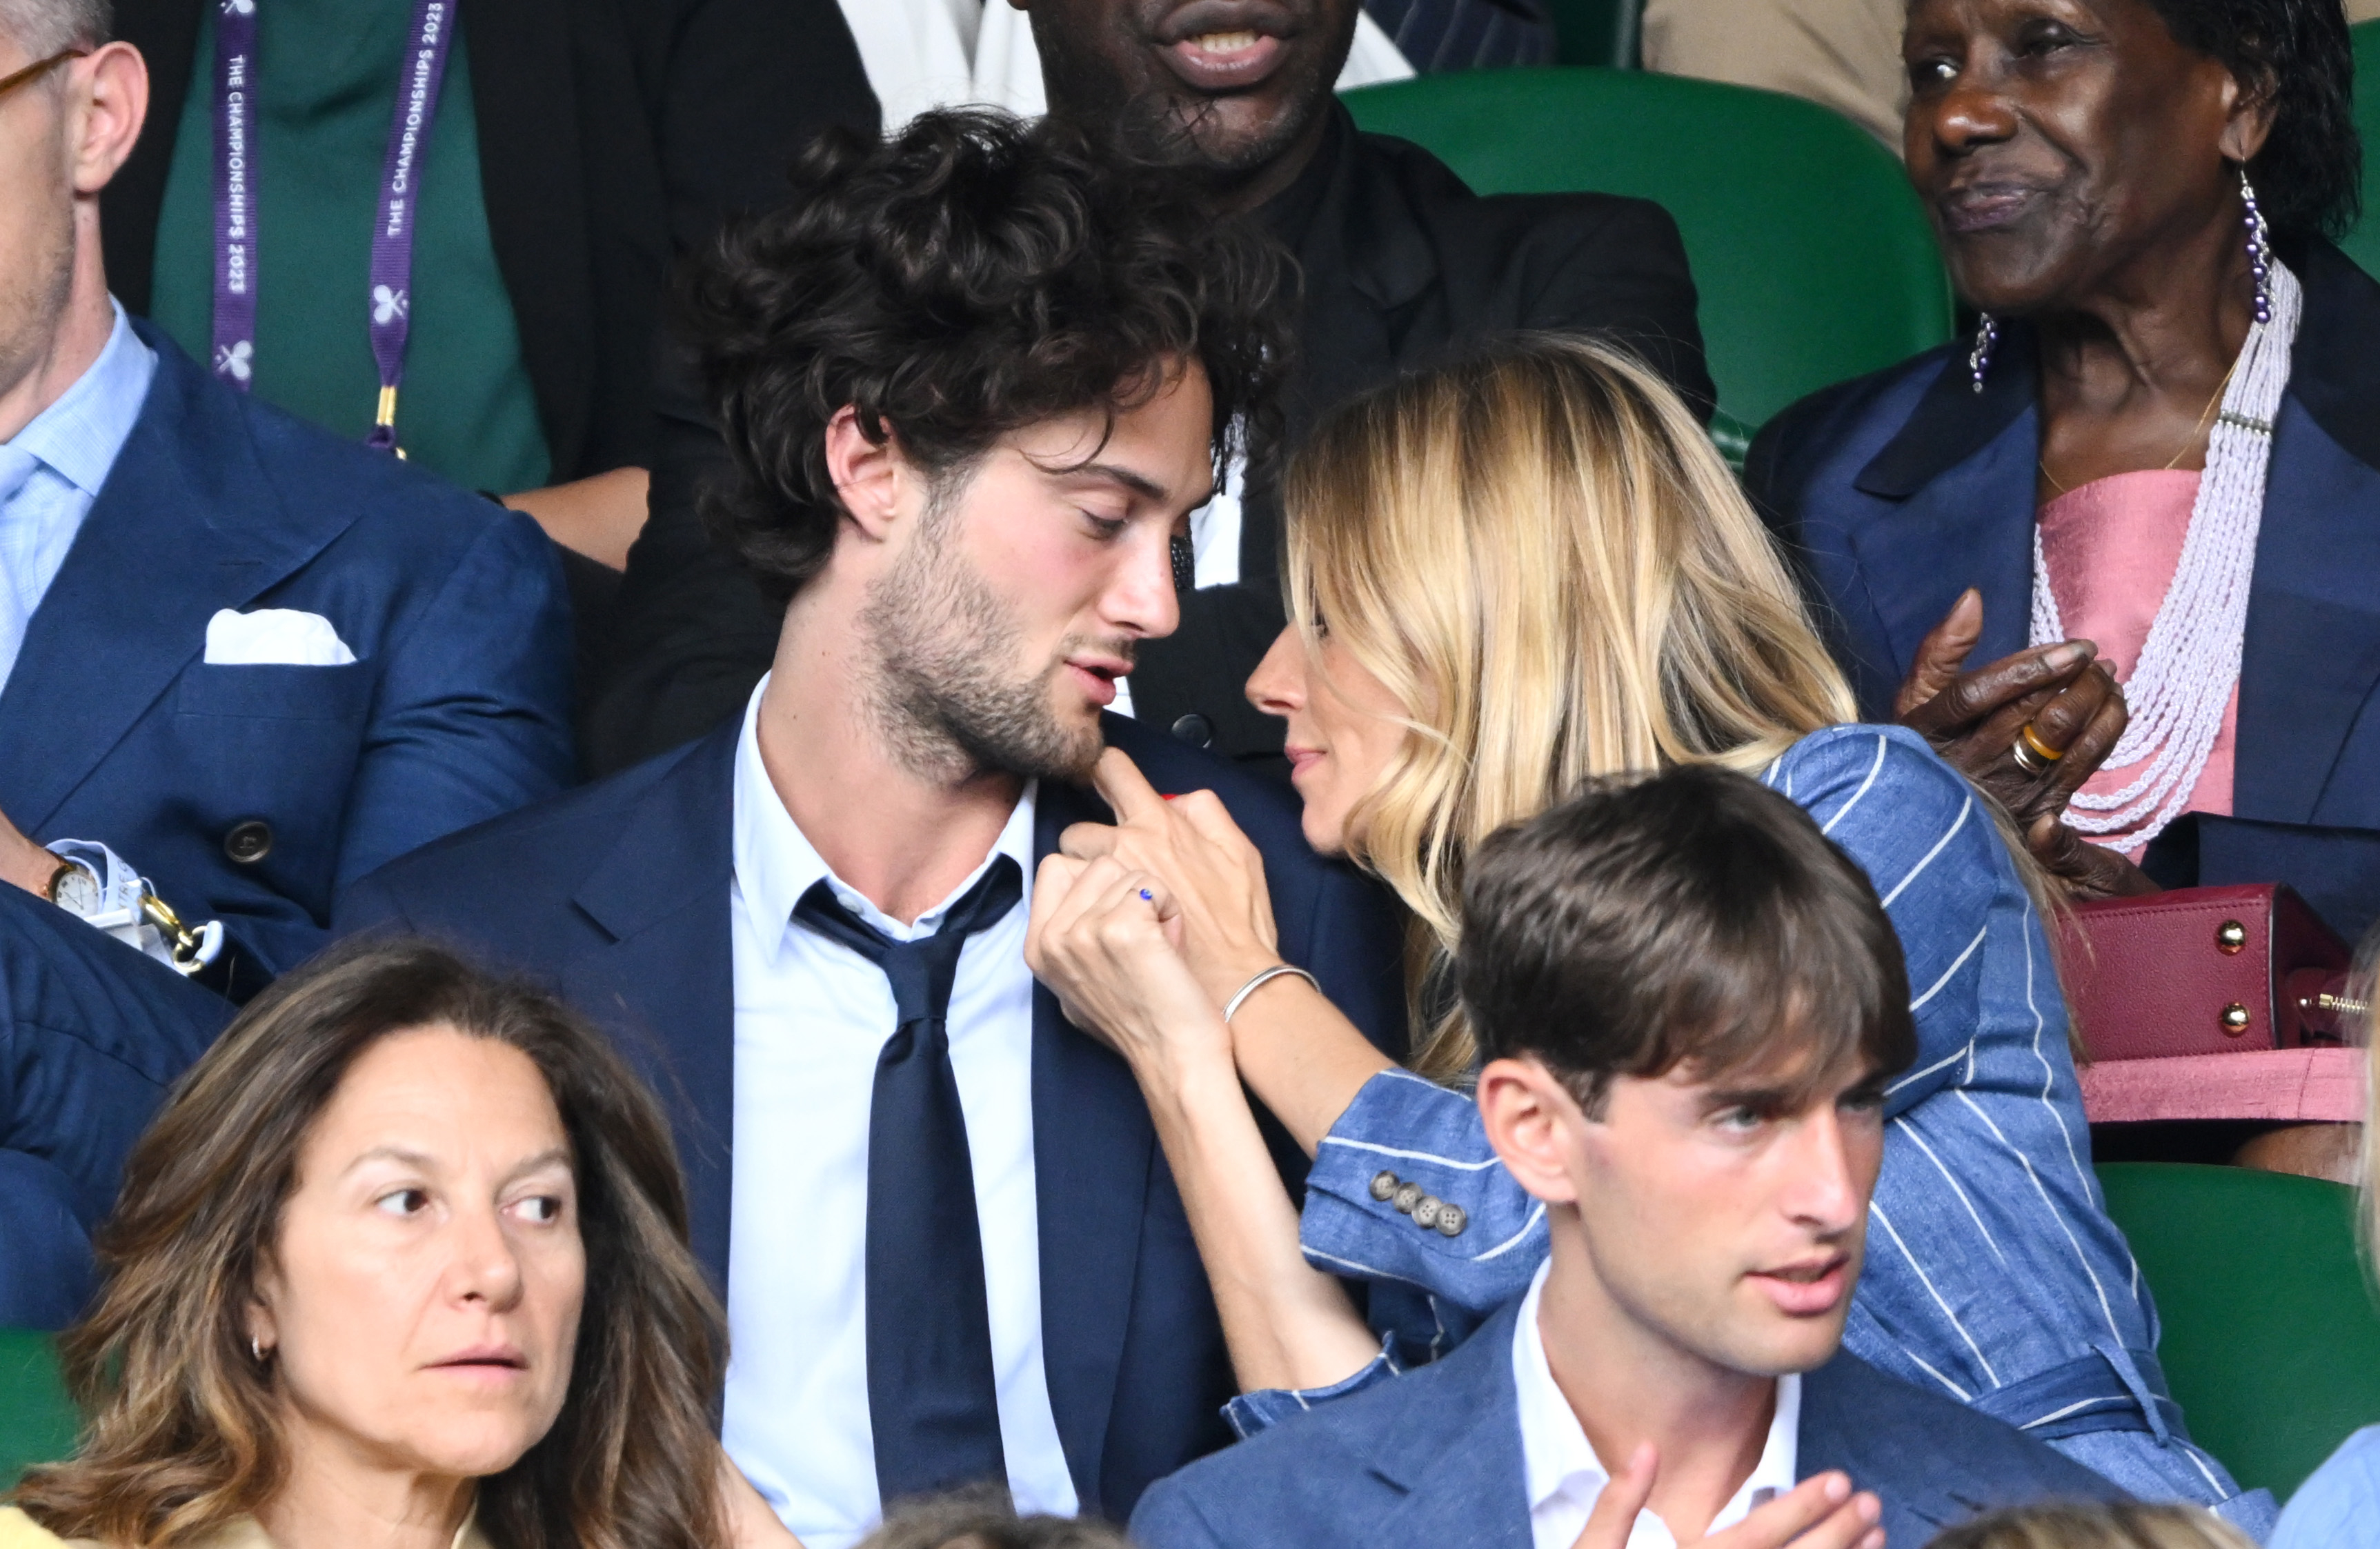 Oli Green and Sienna Miller in a crowd